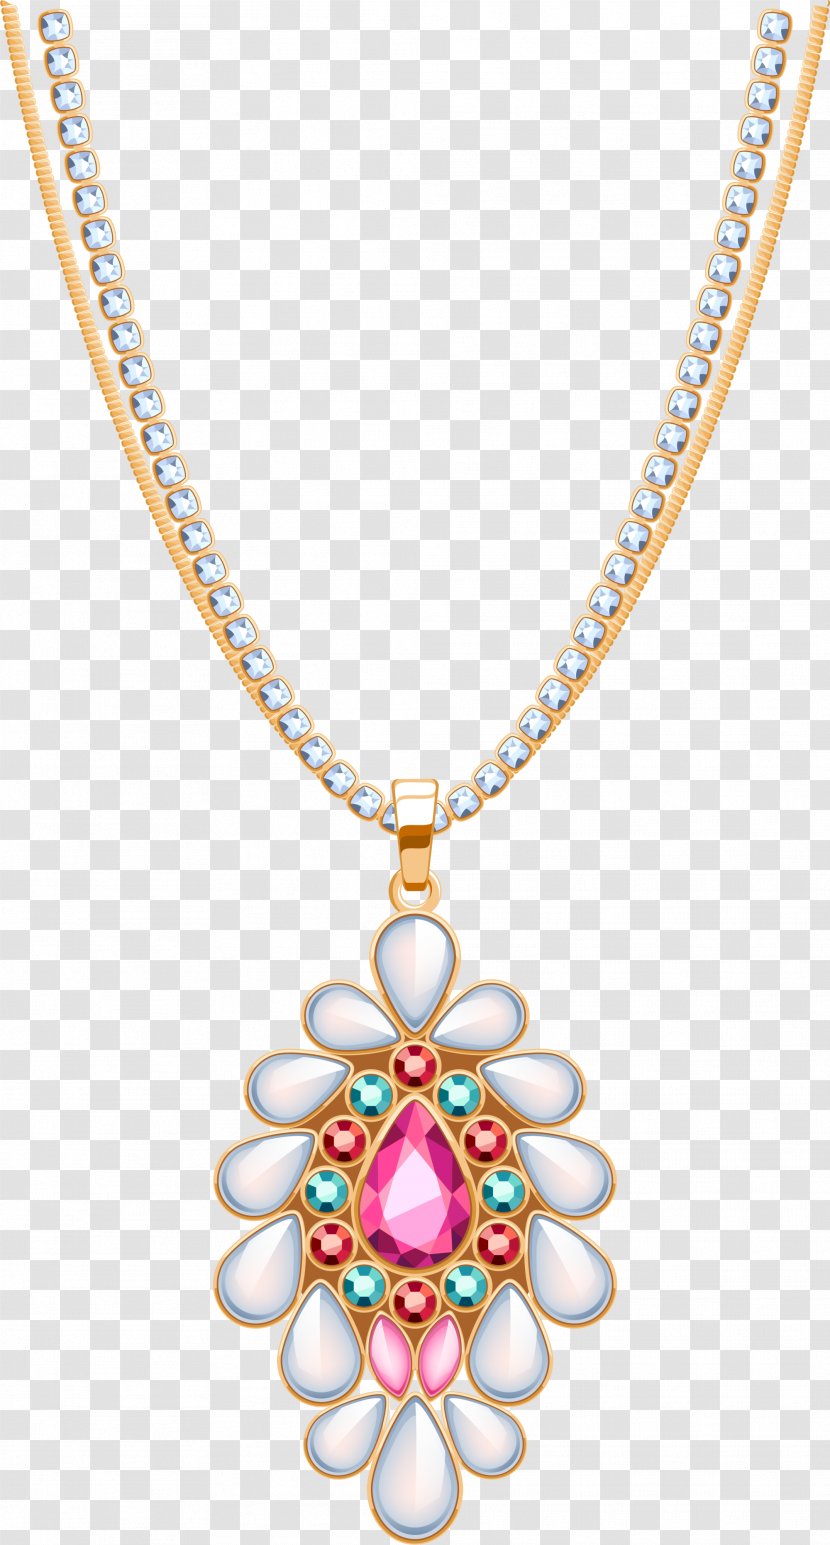 Locket Necklace Jewellery Diamond - Jewelry Design - Golden Concise Transparent PNG